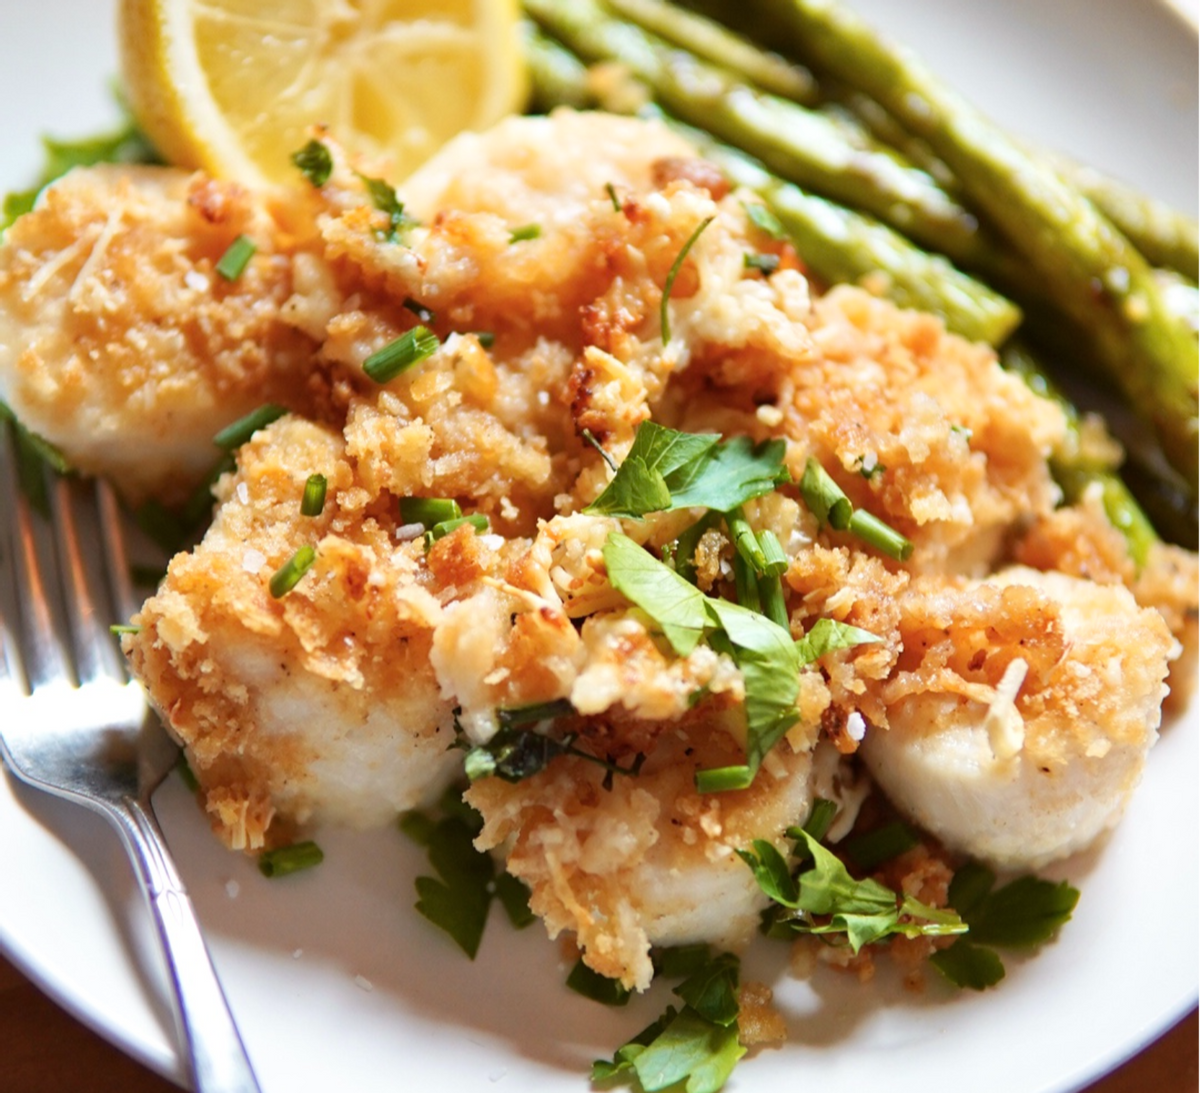 These easy baked scallops are delicious. (Katherine Keenan/Yankee Magazine)